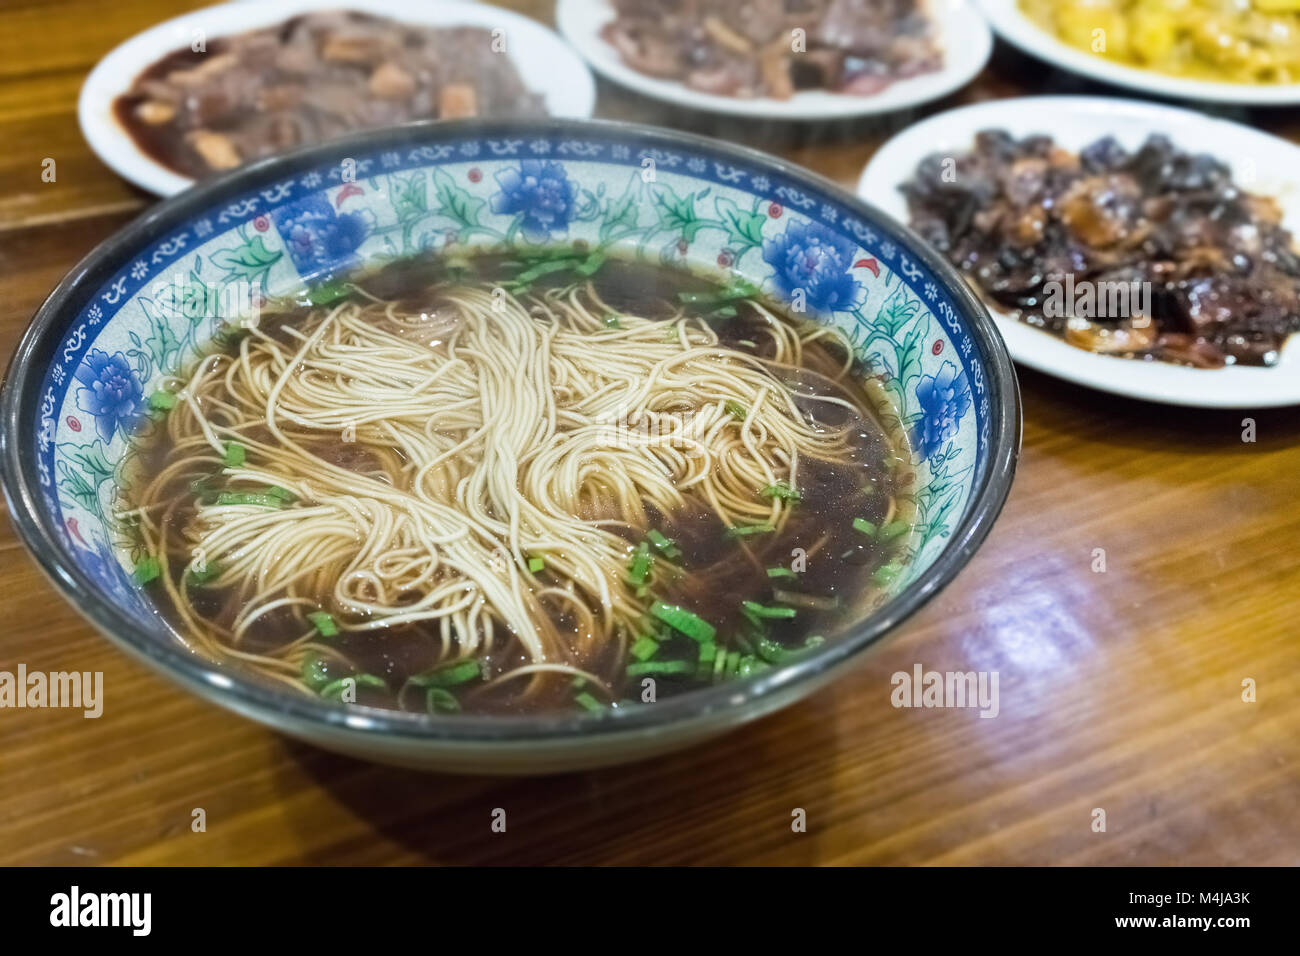 chinese noodles dinner Stock Photo